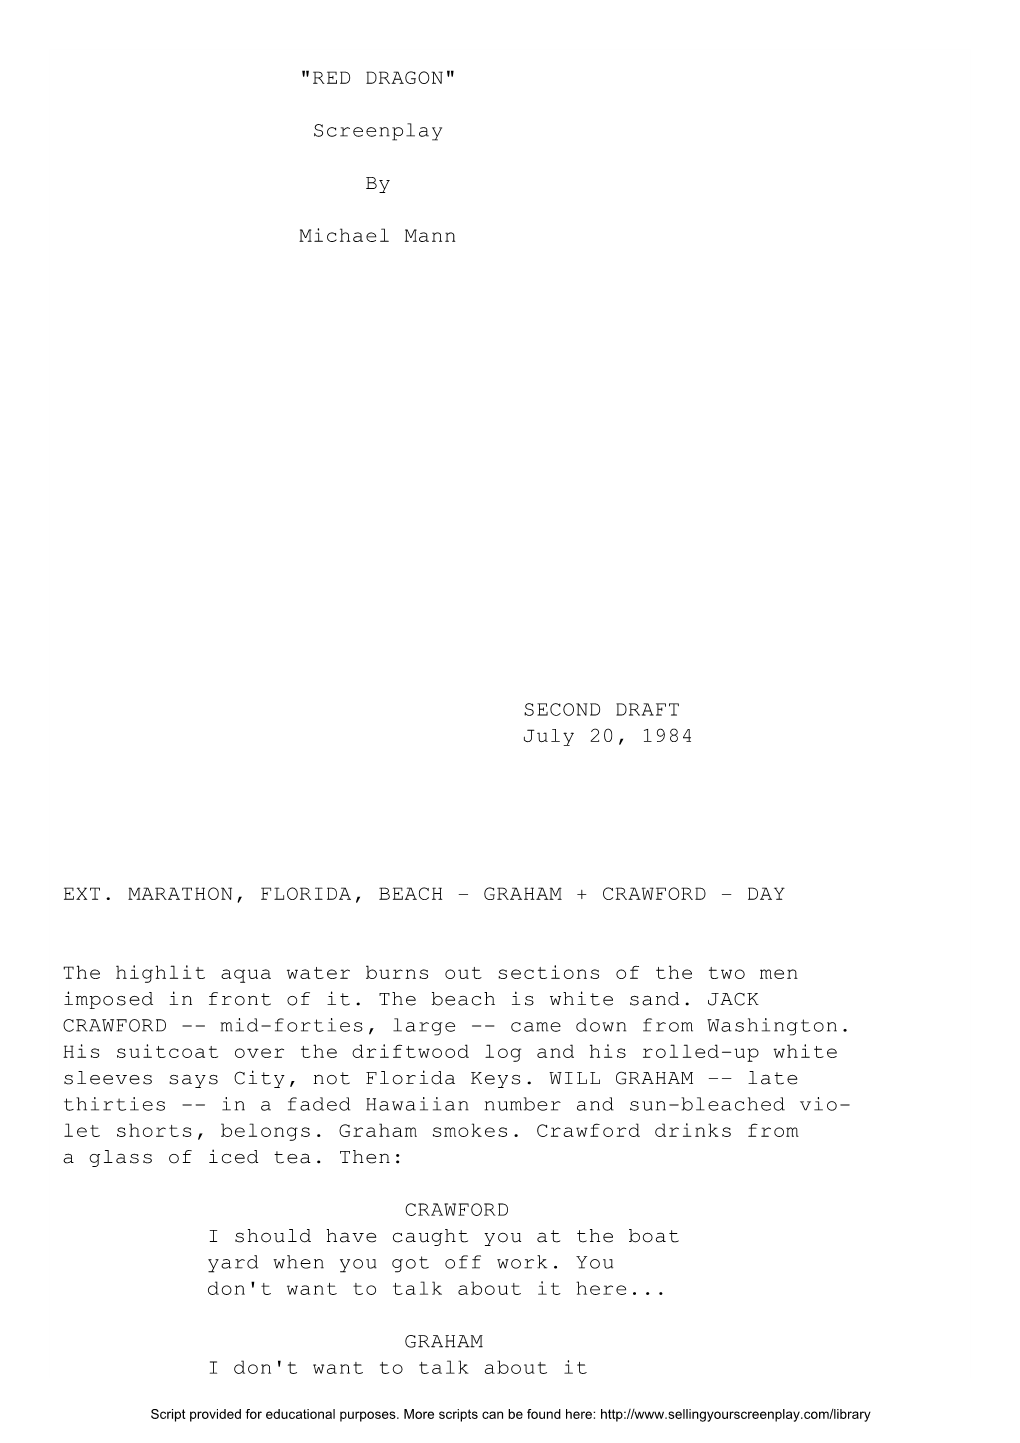 "RED DRAGON" Screenplay by Michael Mann SECOND DRAFT